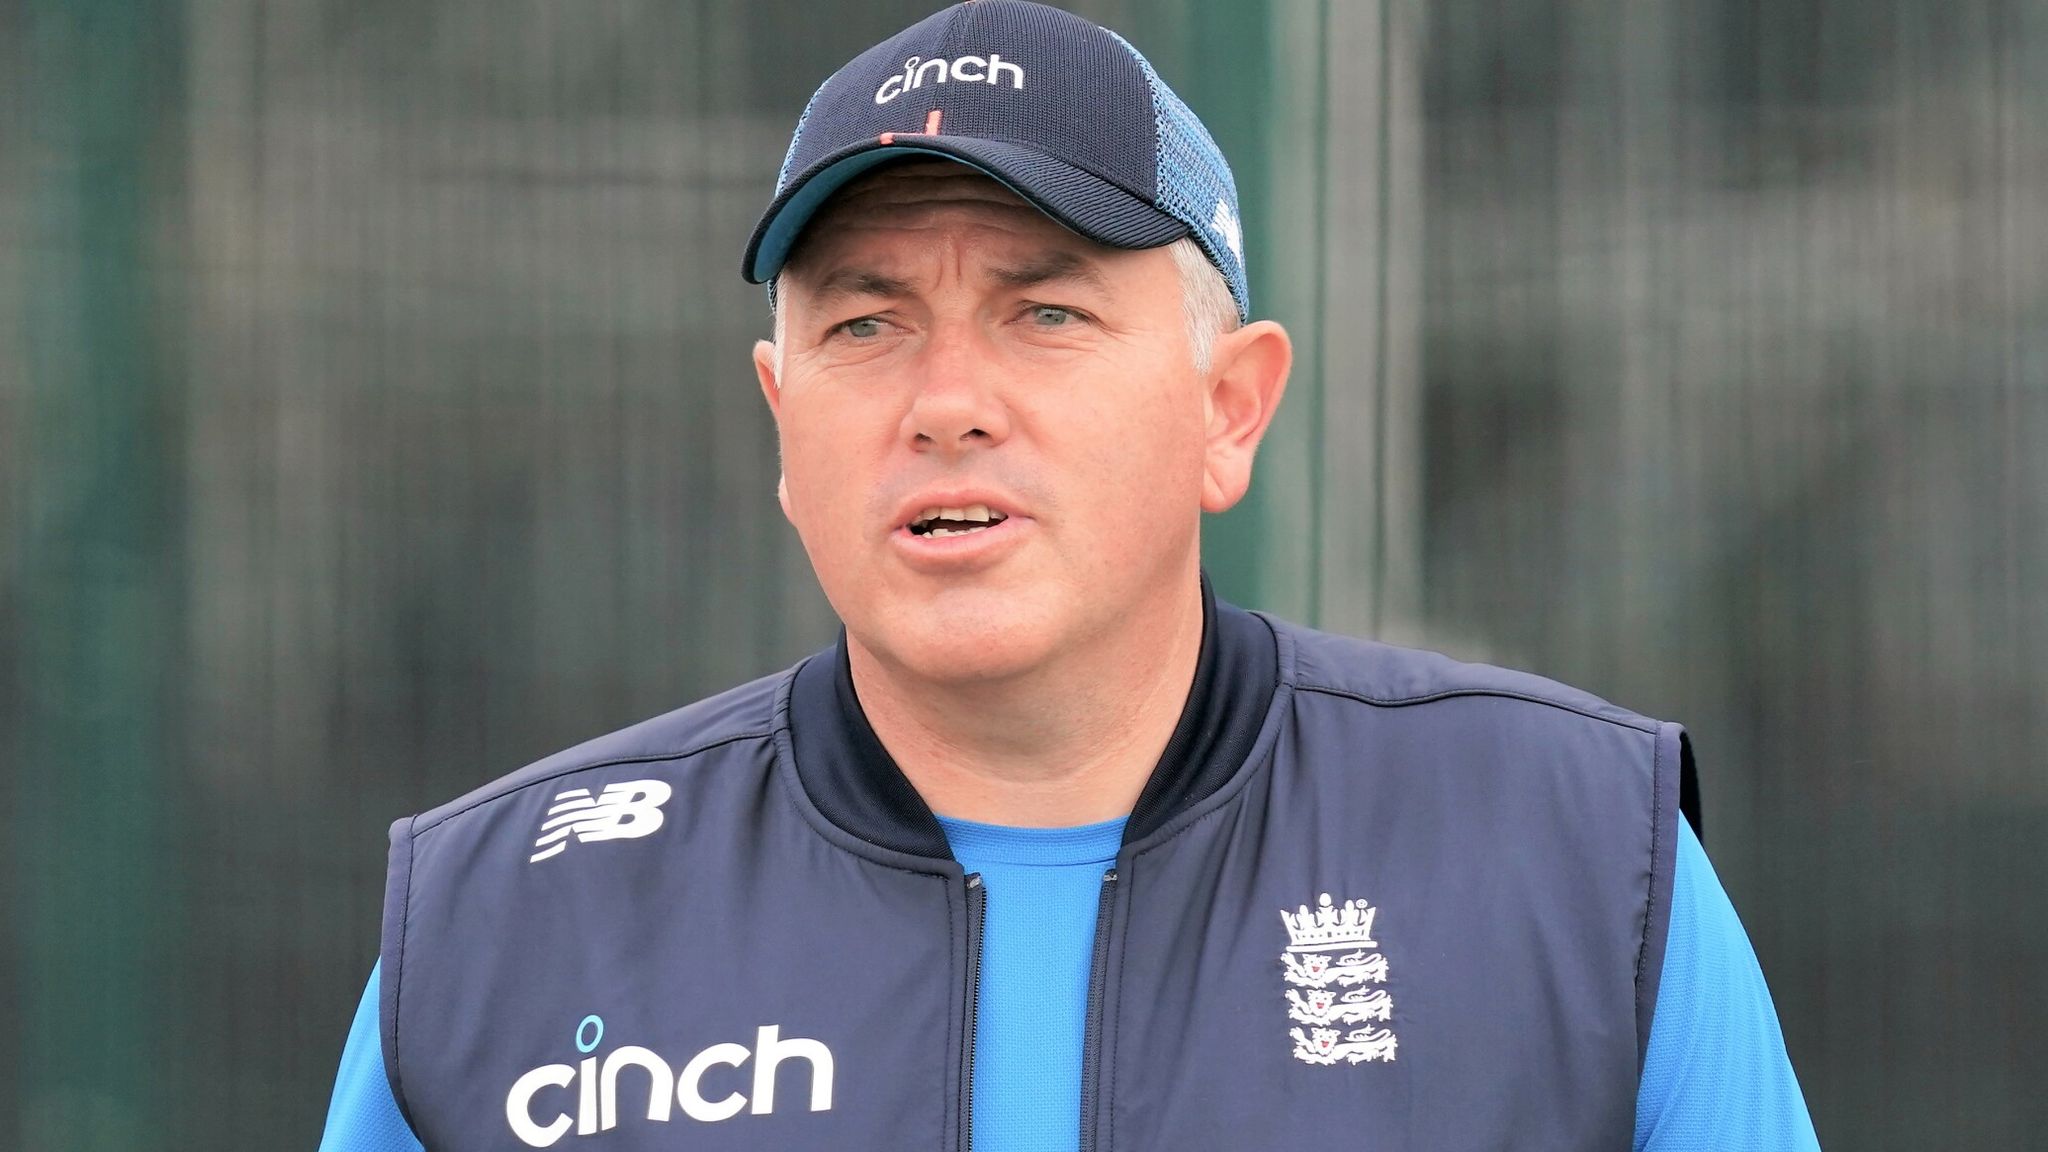 England dismiss head coach Chris Silverwood after Ashes defeat